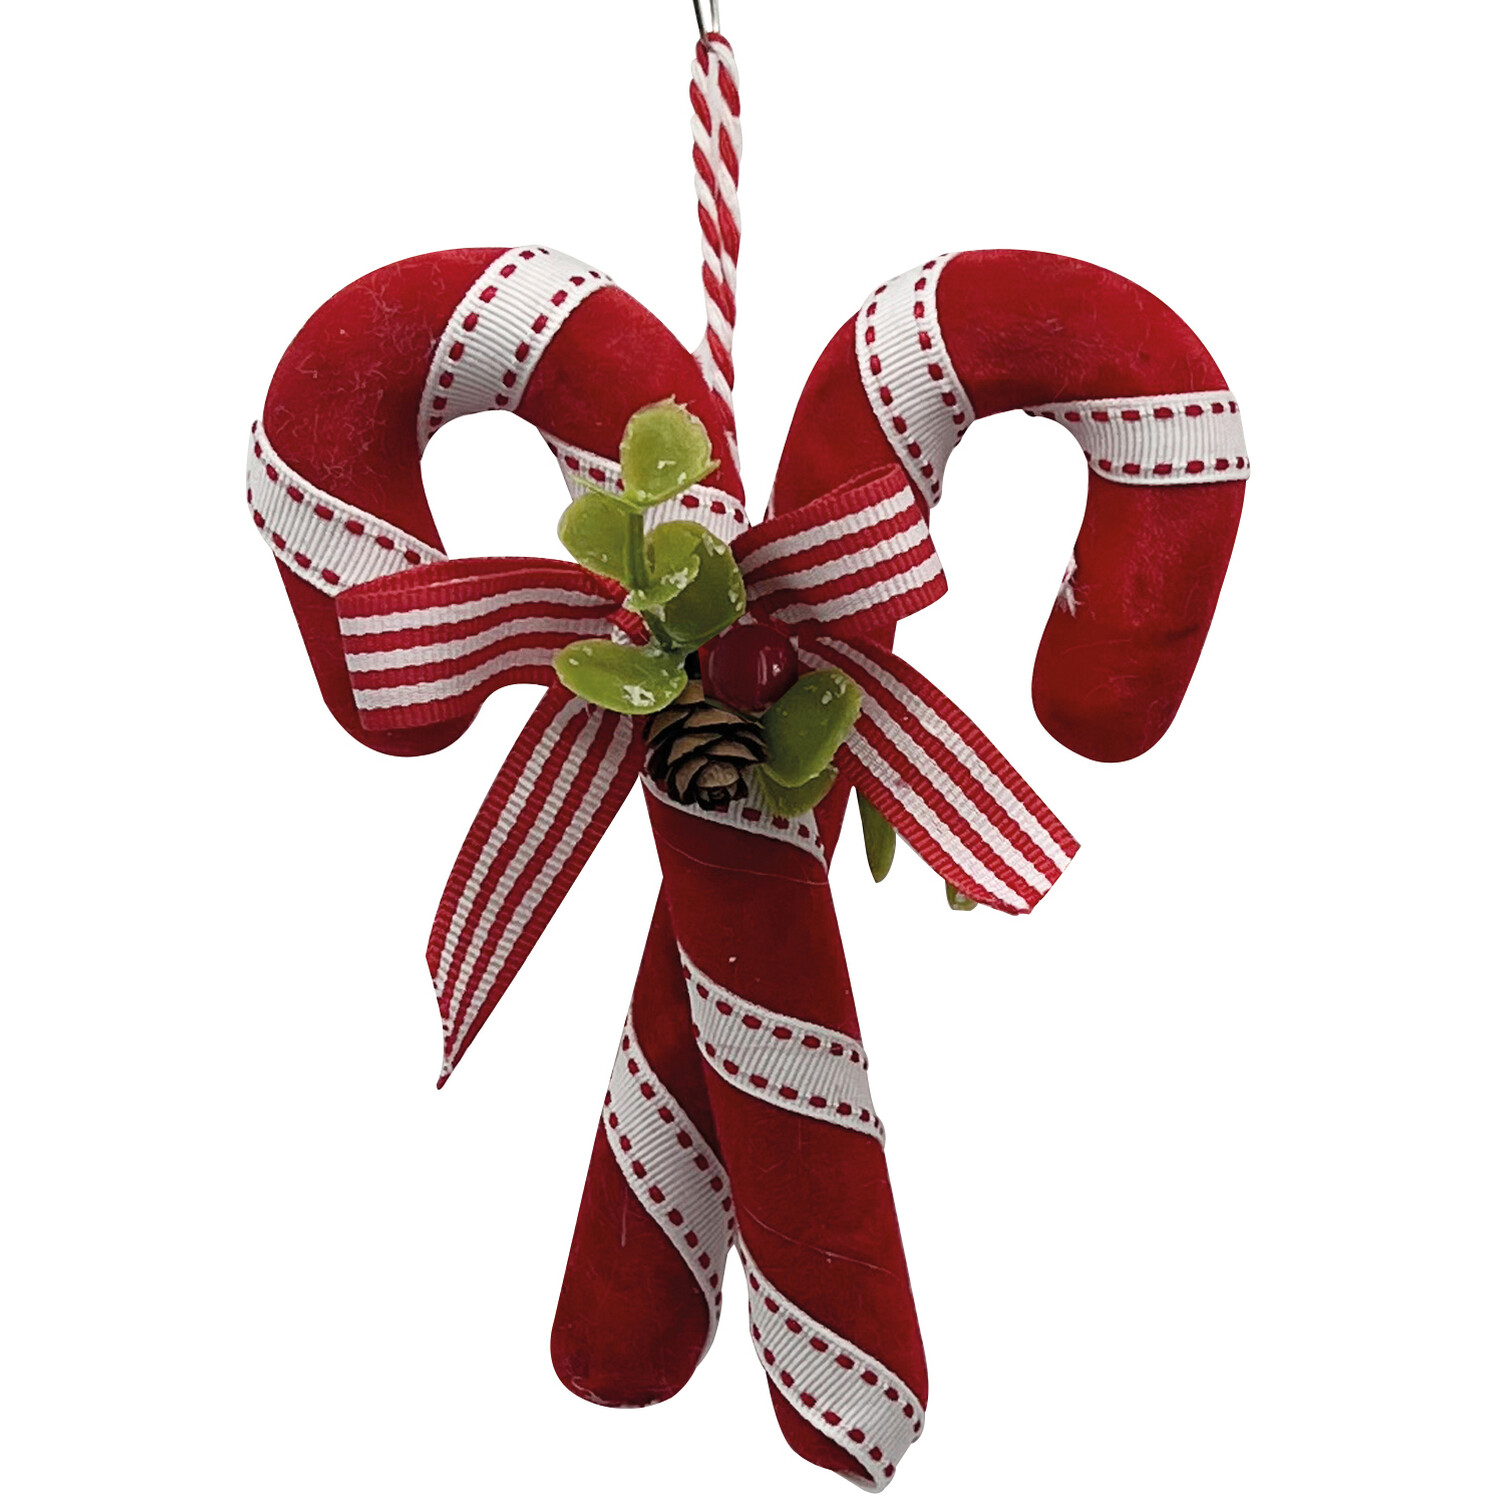 Hanging Candy Canes with Bow Image 1